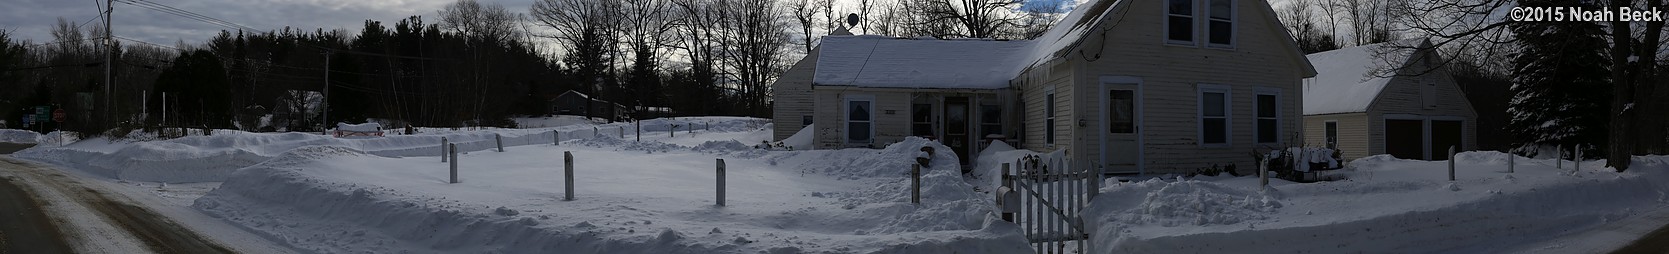 January 28, 2015: Panorama of the front of the house after the snow storm